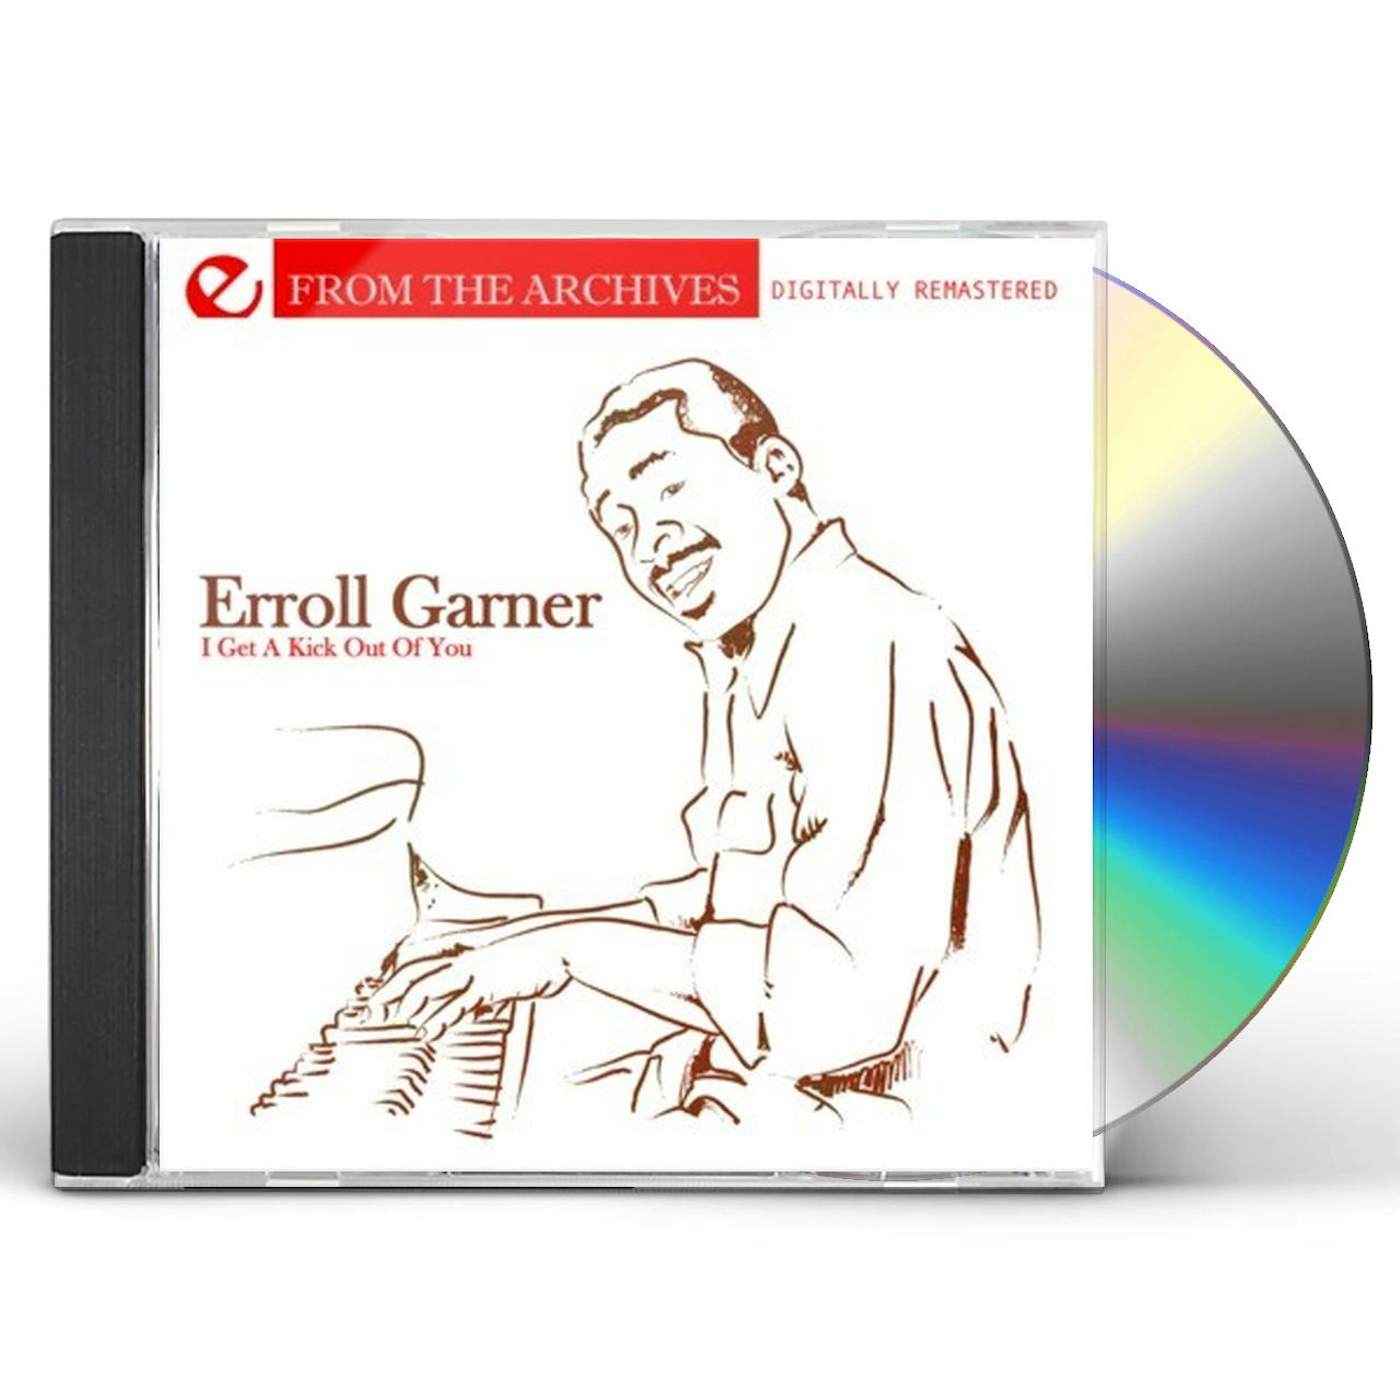 Erroll Garner I GET A KICK OUT OF YOU - FROM THE ARCHIVES CD